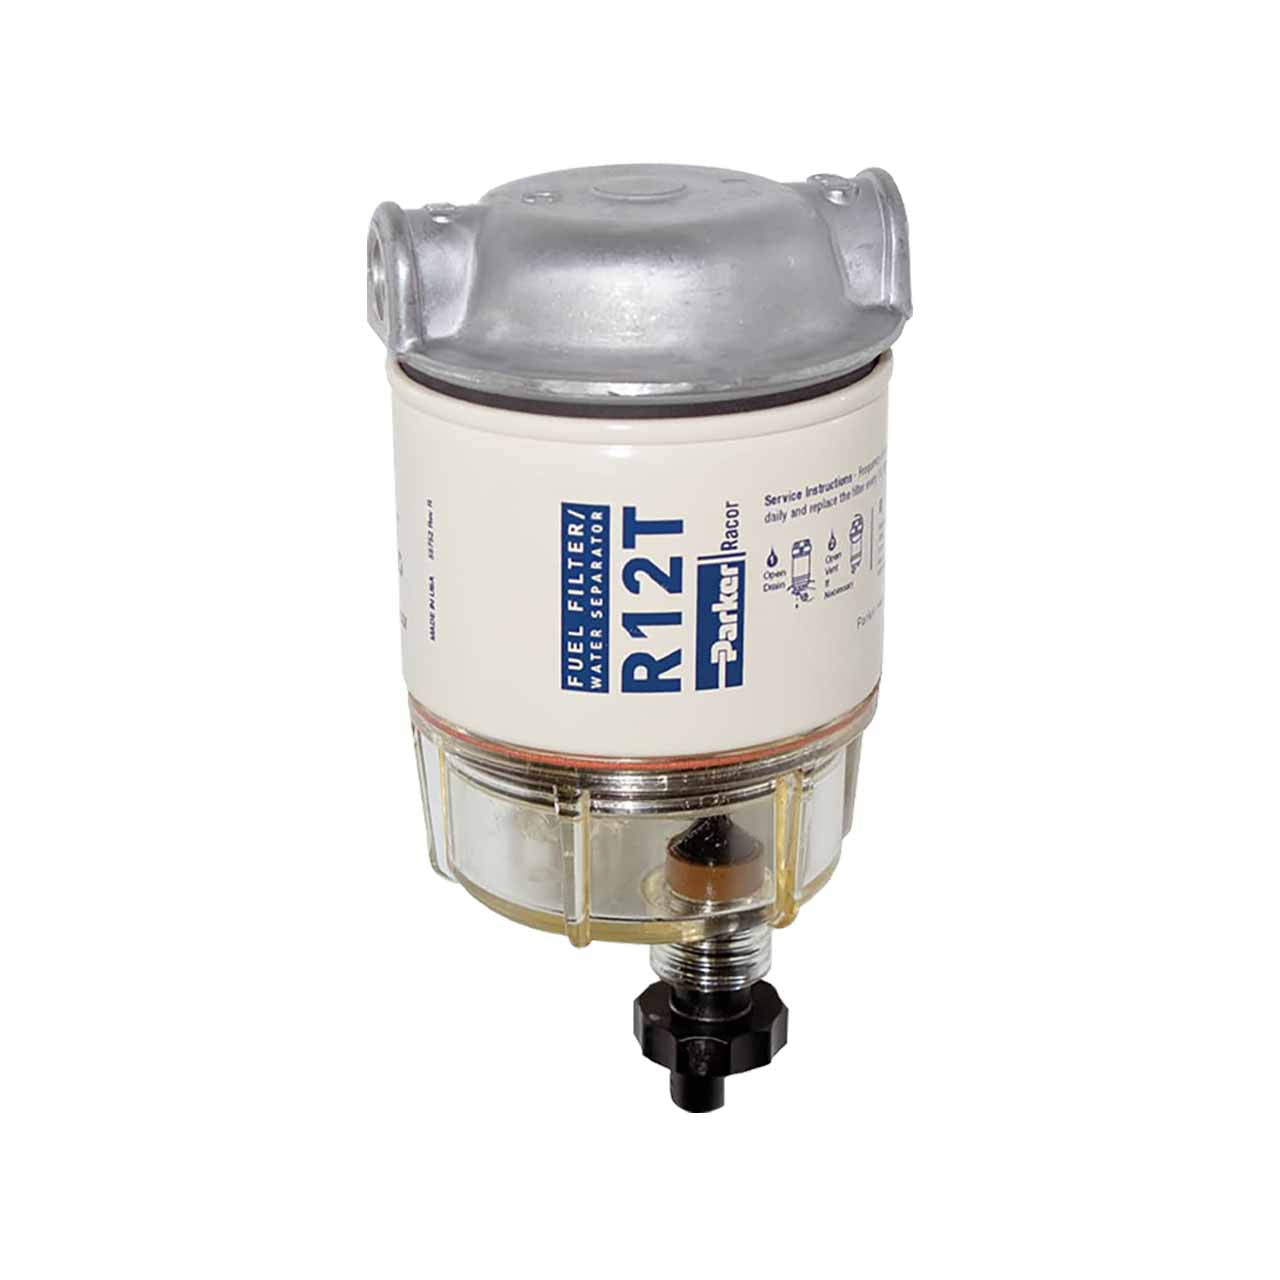 140R Racor Fuel Filter / Water Separator - Complete Unit